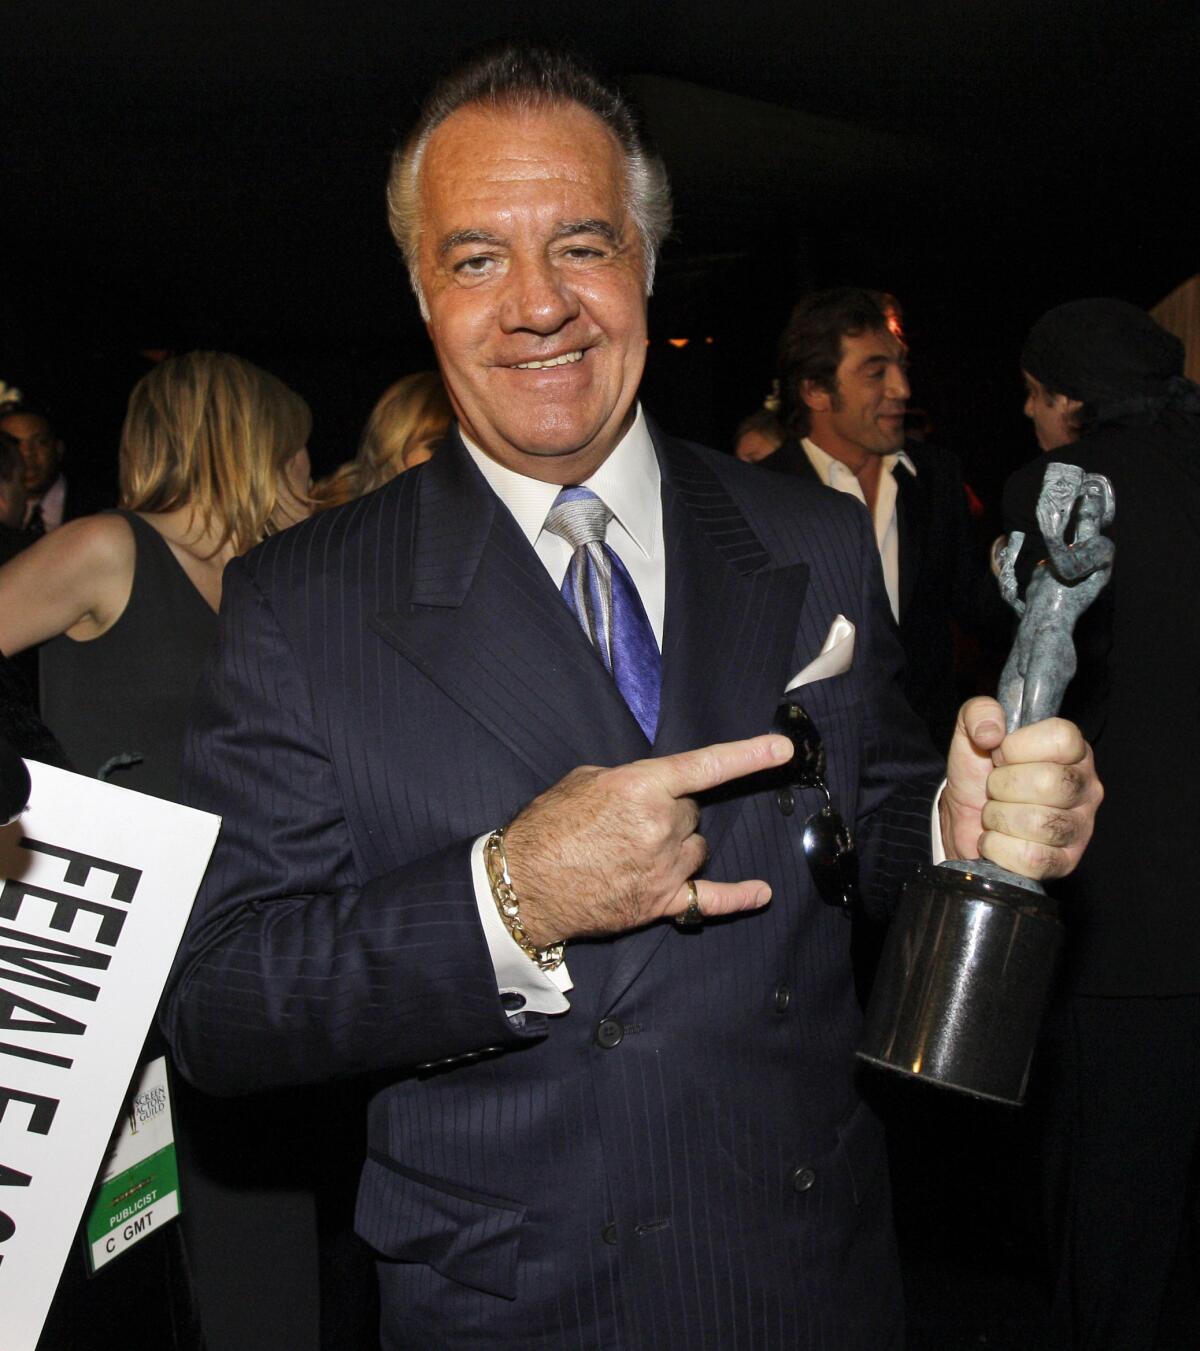 A man in a suit gestures with one hand toward the award statue he holds in the other hand